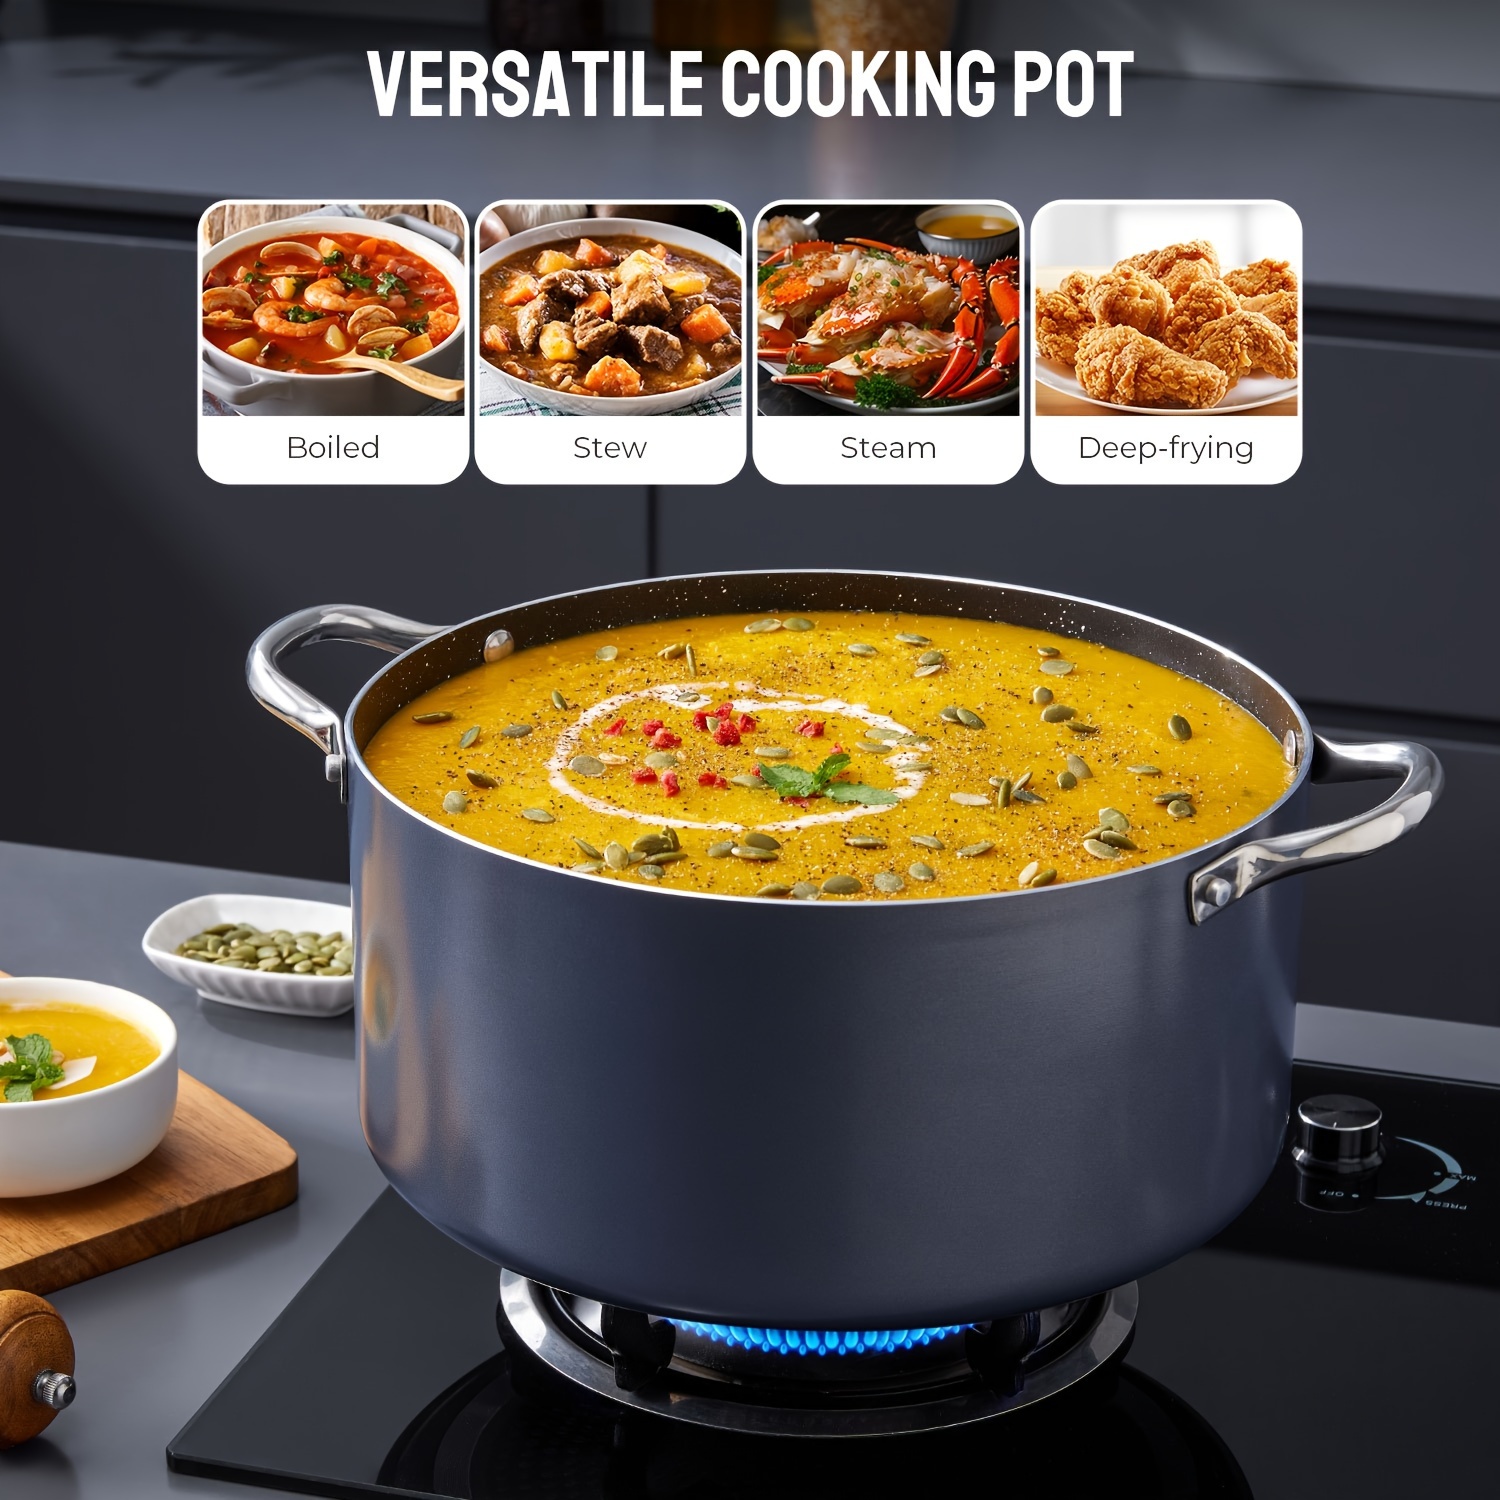 

10 Qt Stock Pot With Lid, Large Non Stick Cooking Pot, Induction Pot For Soup, Broth, Chili, Stew, All Stove Compatible, Grey